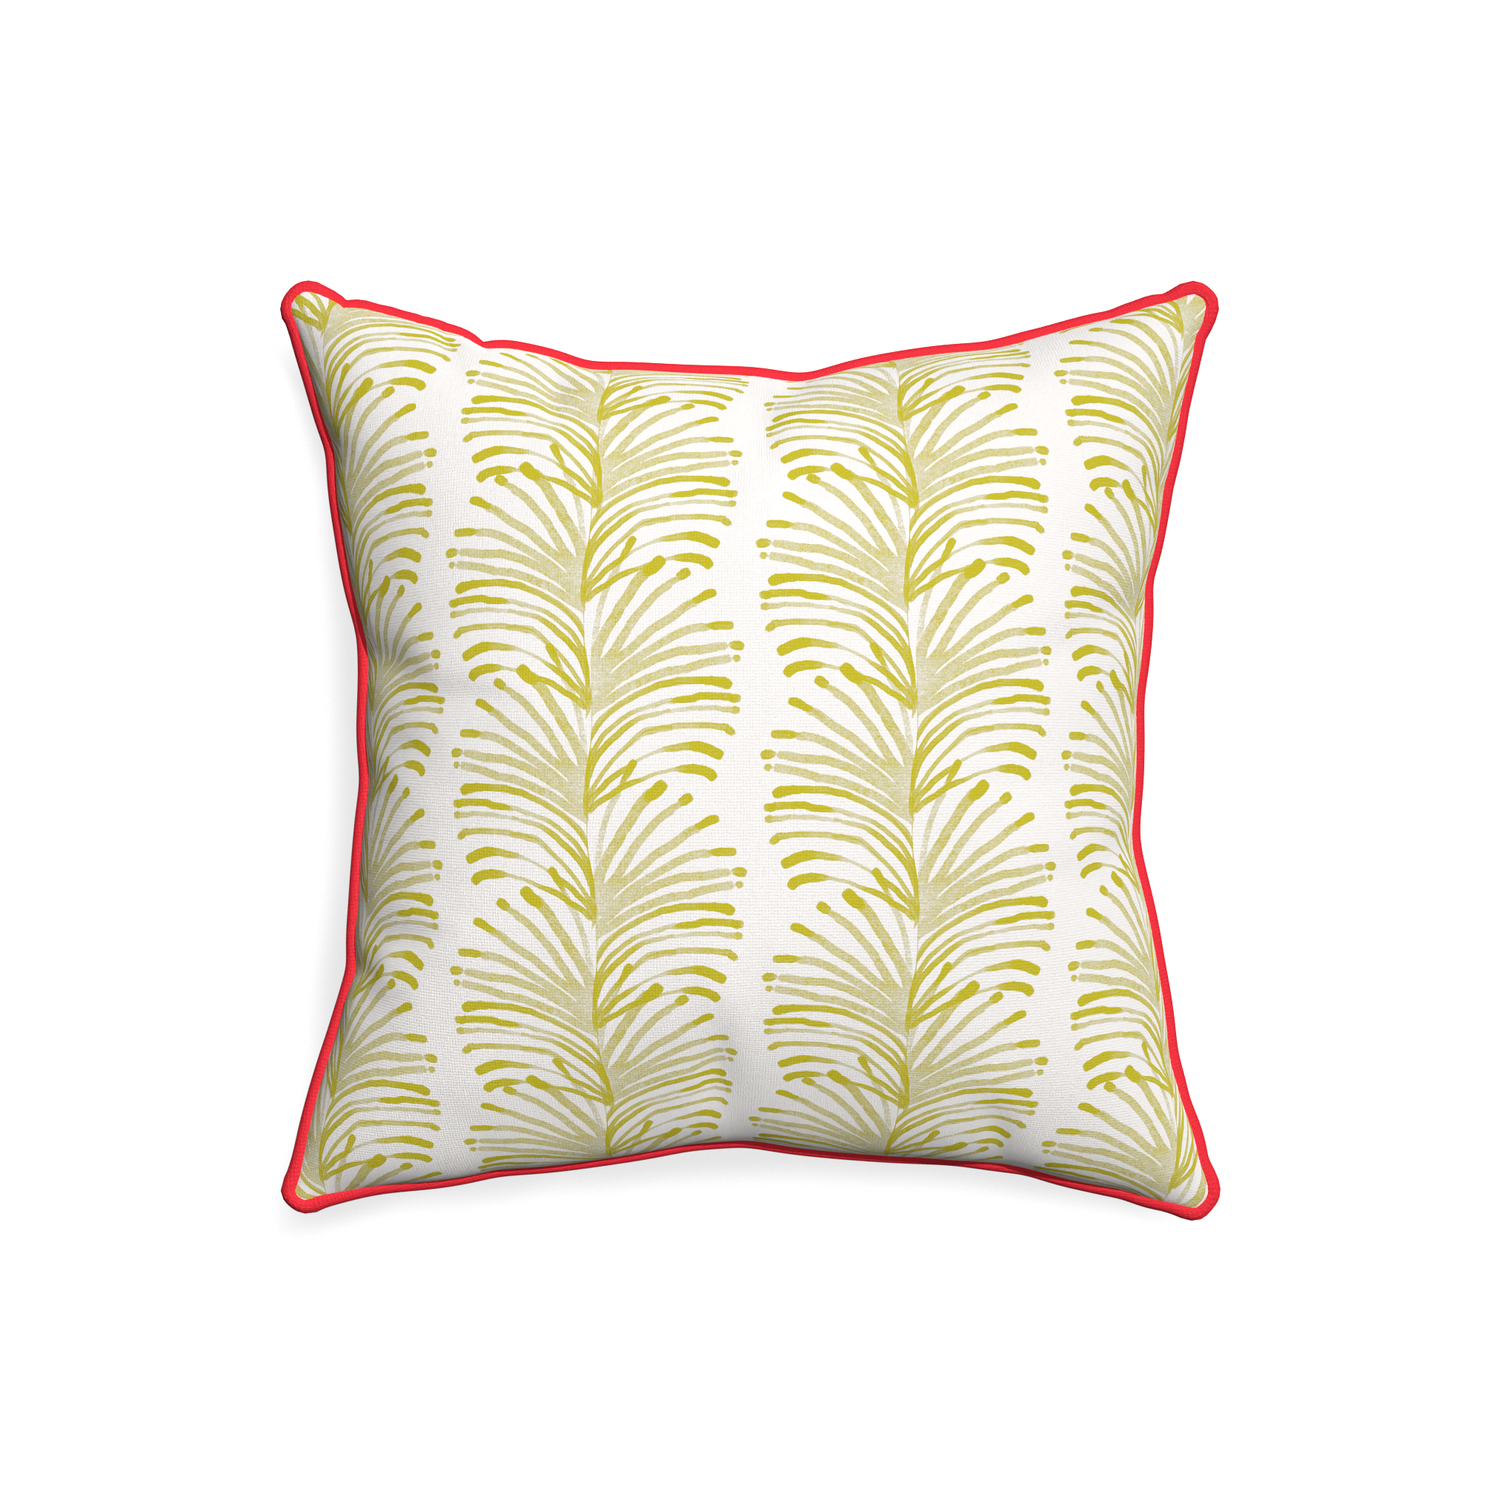 20-square emma chartreuse custom pillow with cherry piping on white background